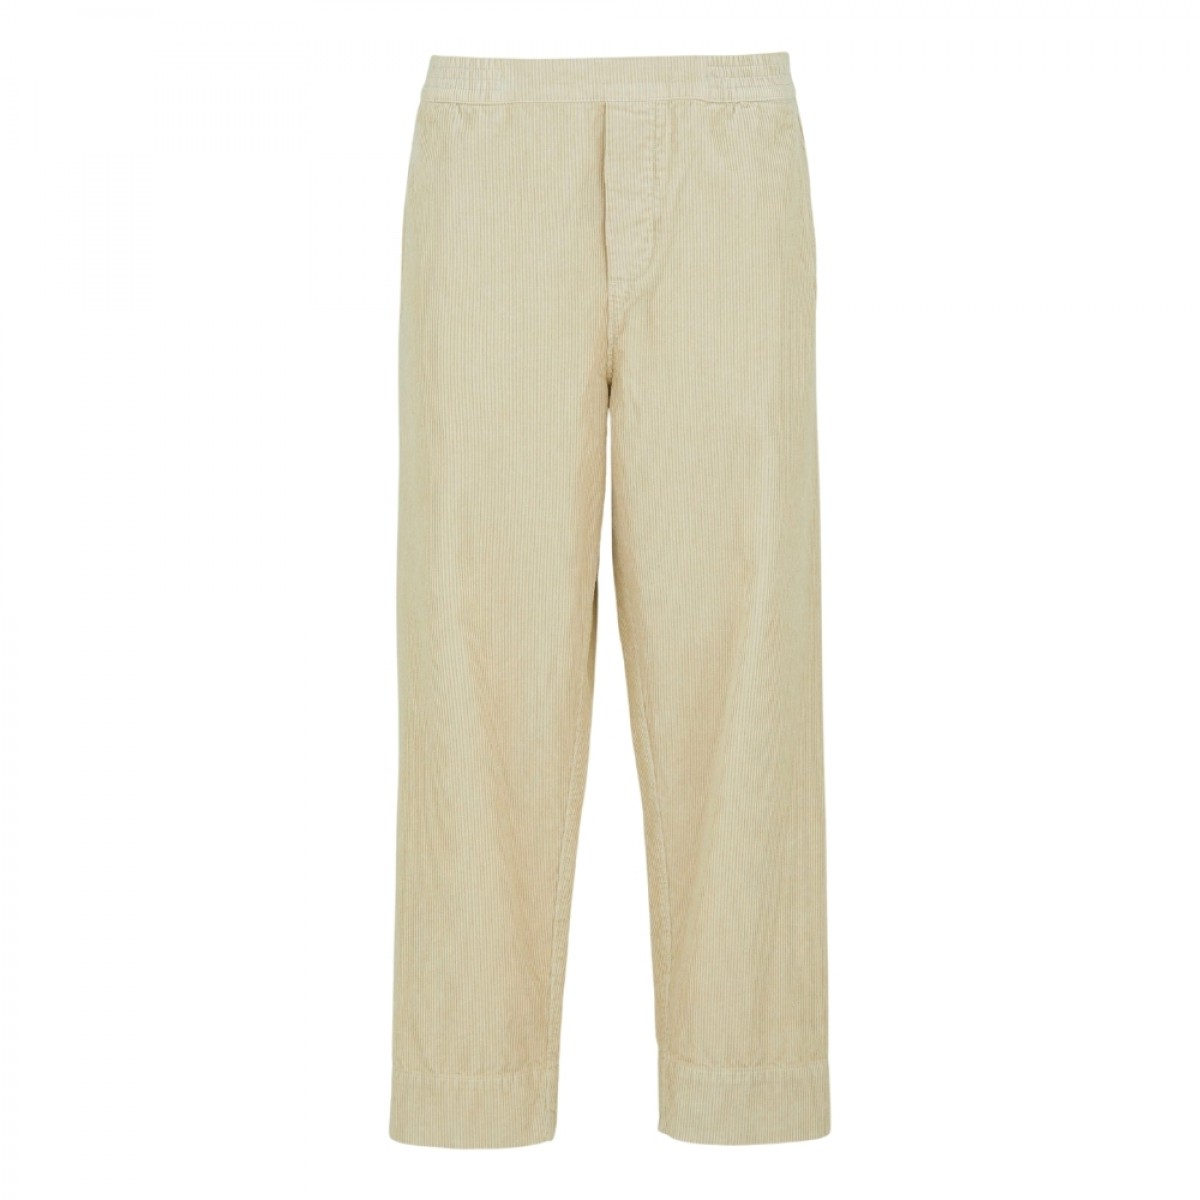 coco pant corduroy - fossil - front